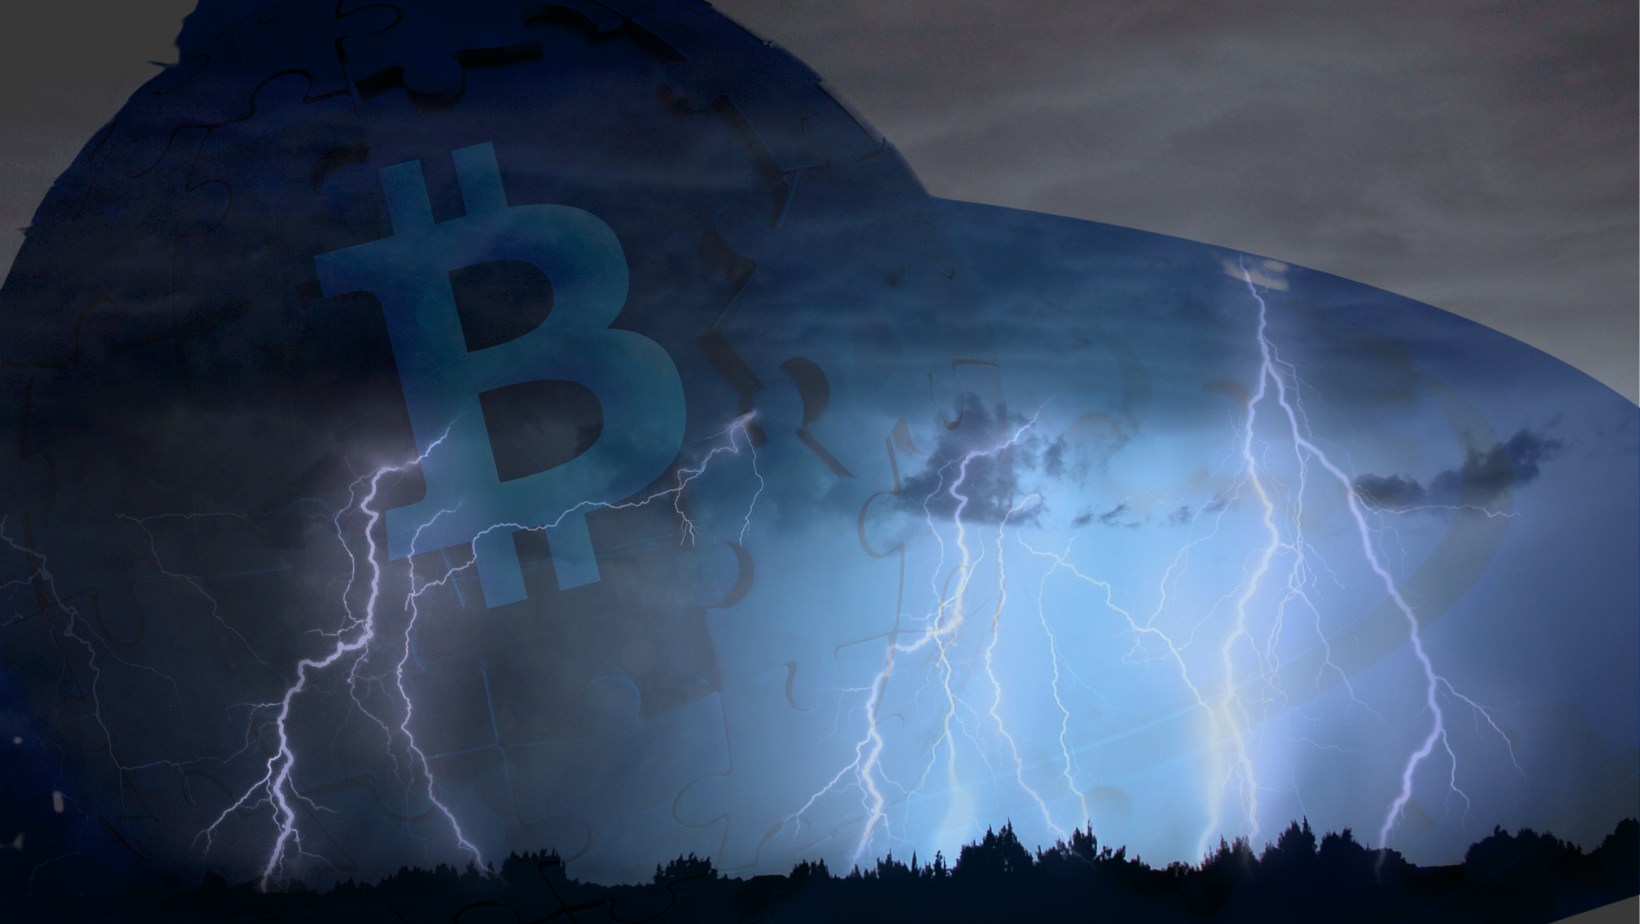 A crypto regulatory storm is coming in 2023. Are we ready?